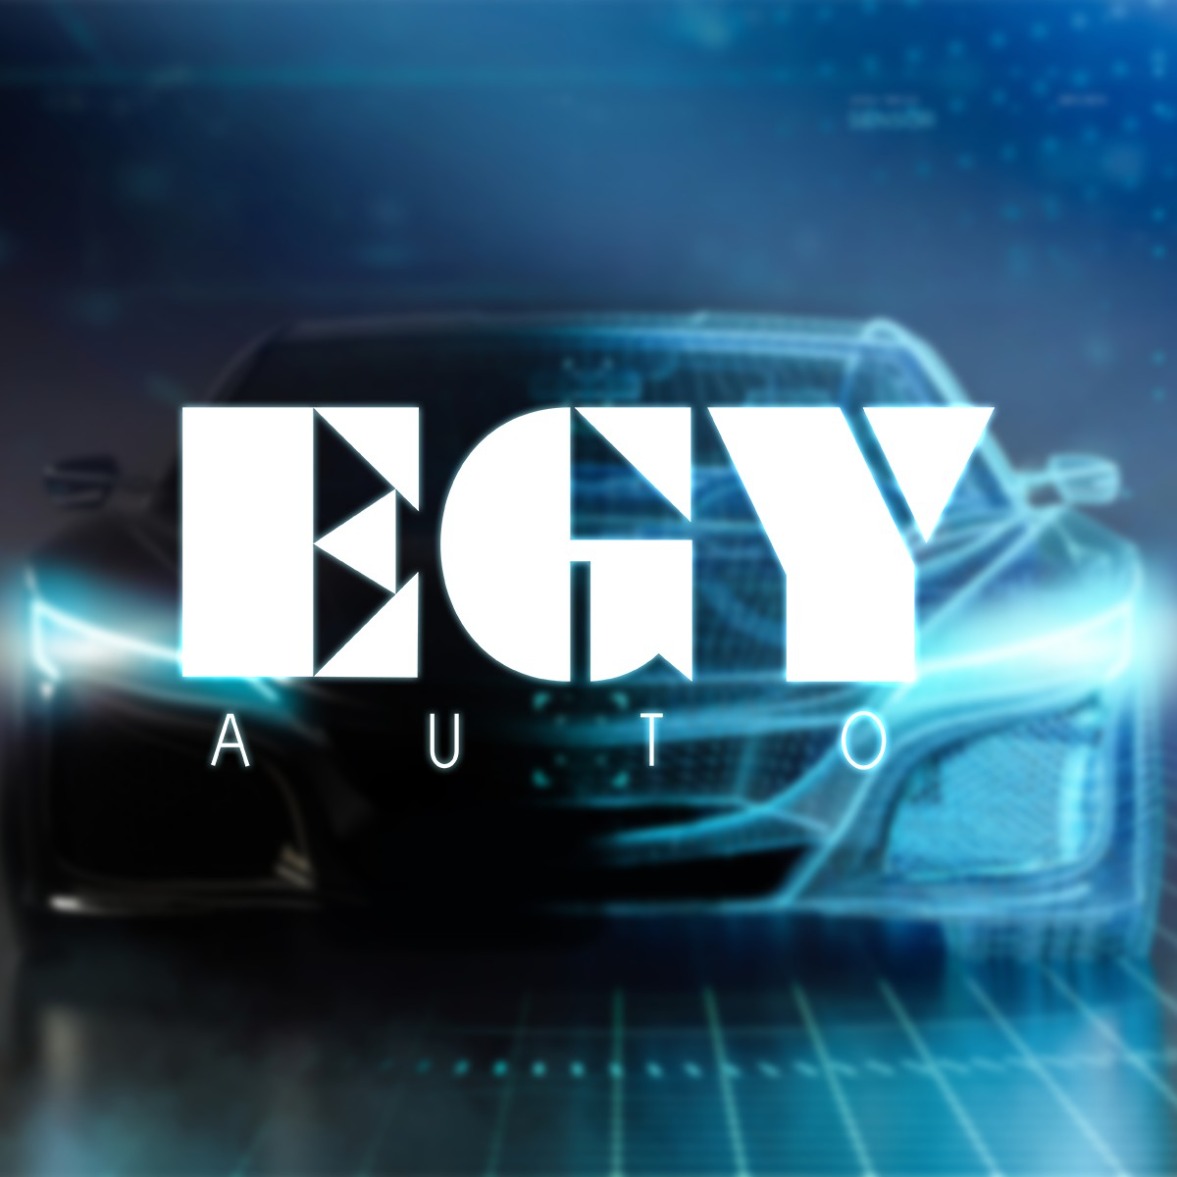 Up To 12 Months with 0% Interest / EGY AUTO